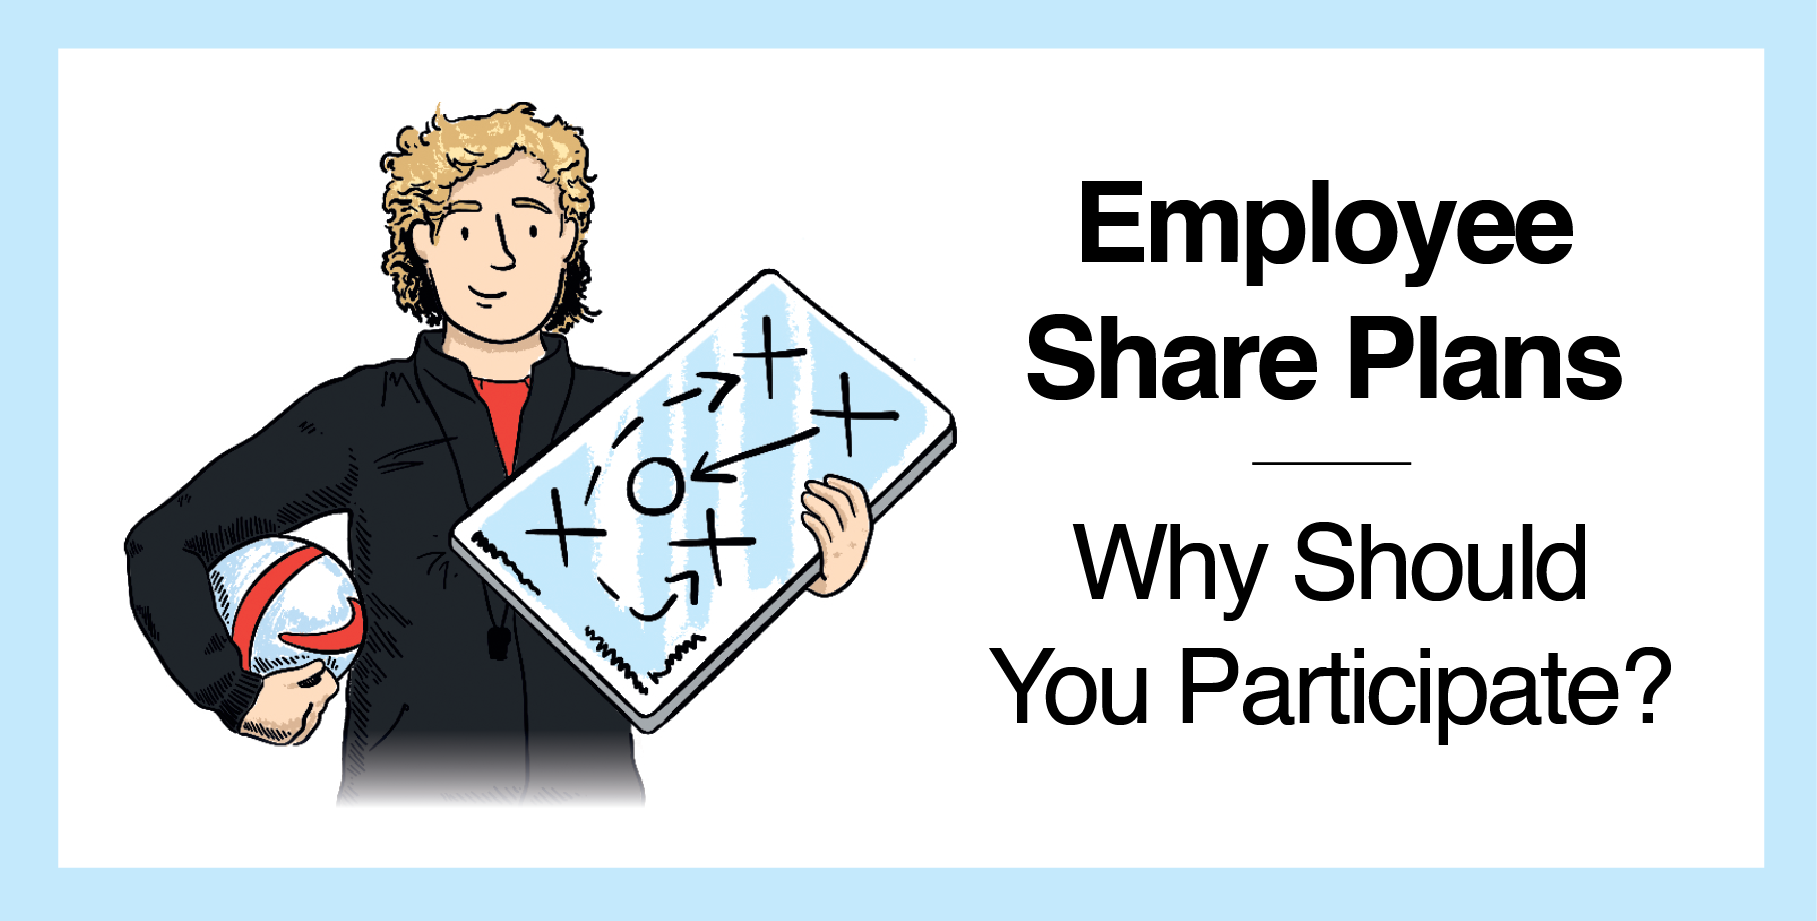 Employee Share Plans Why Should You Participate